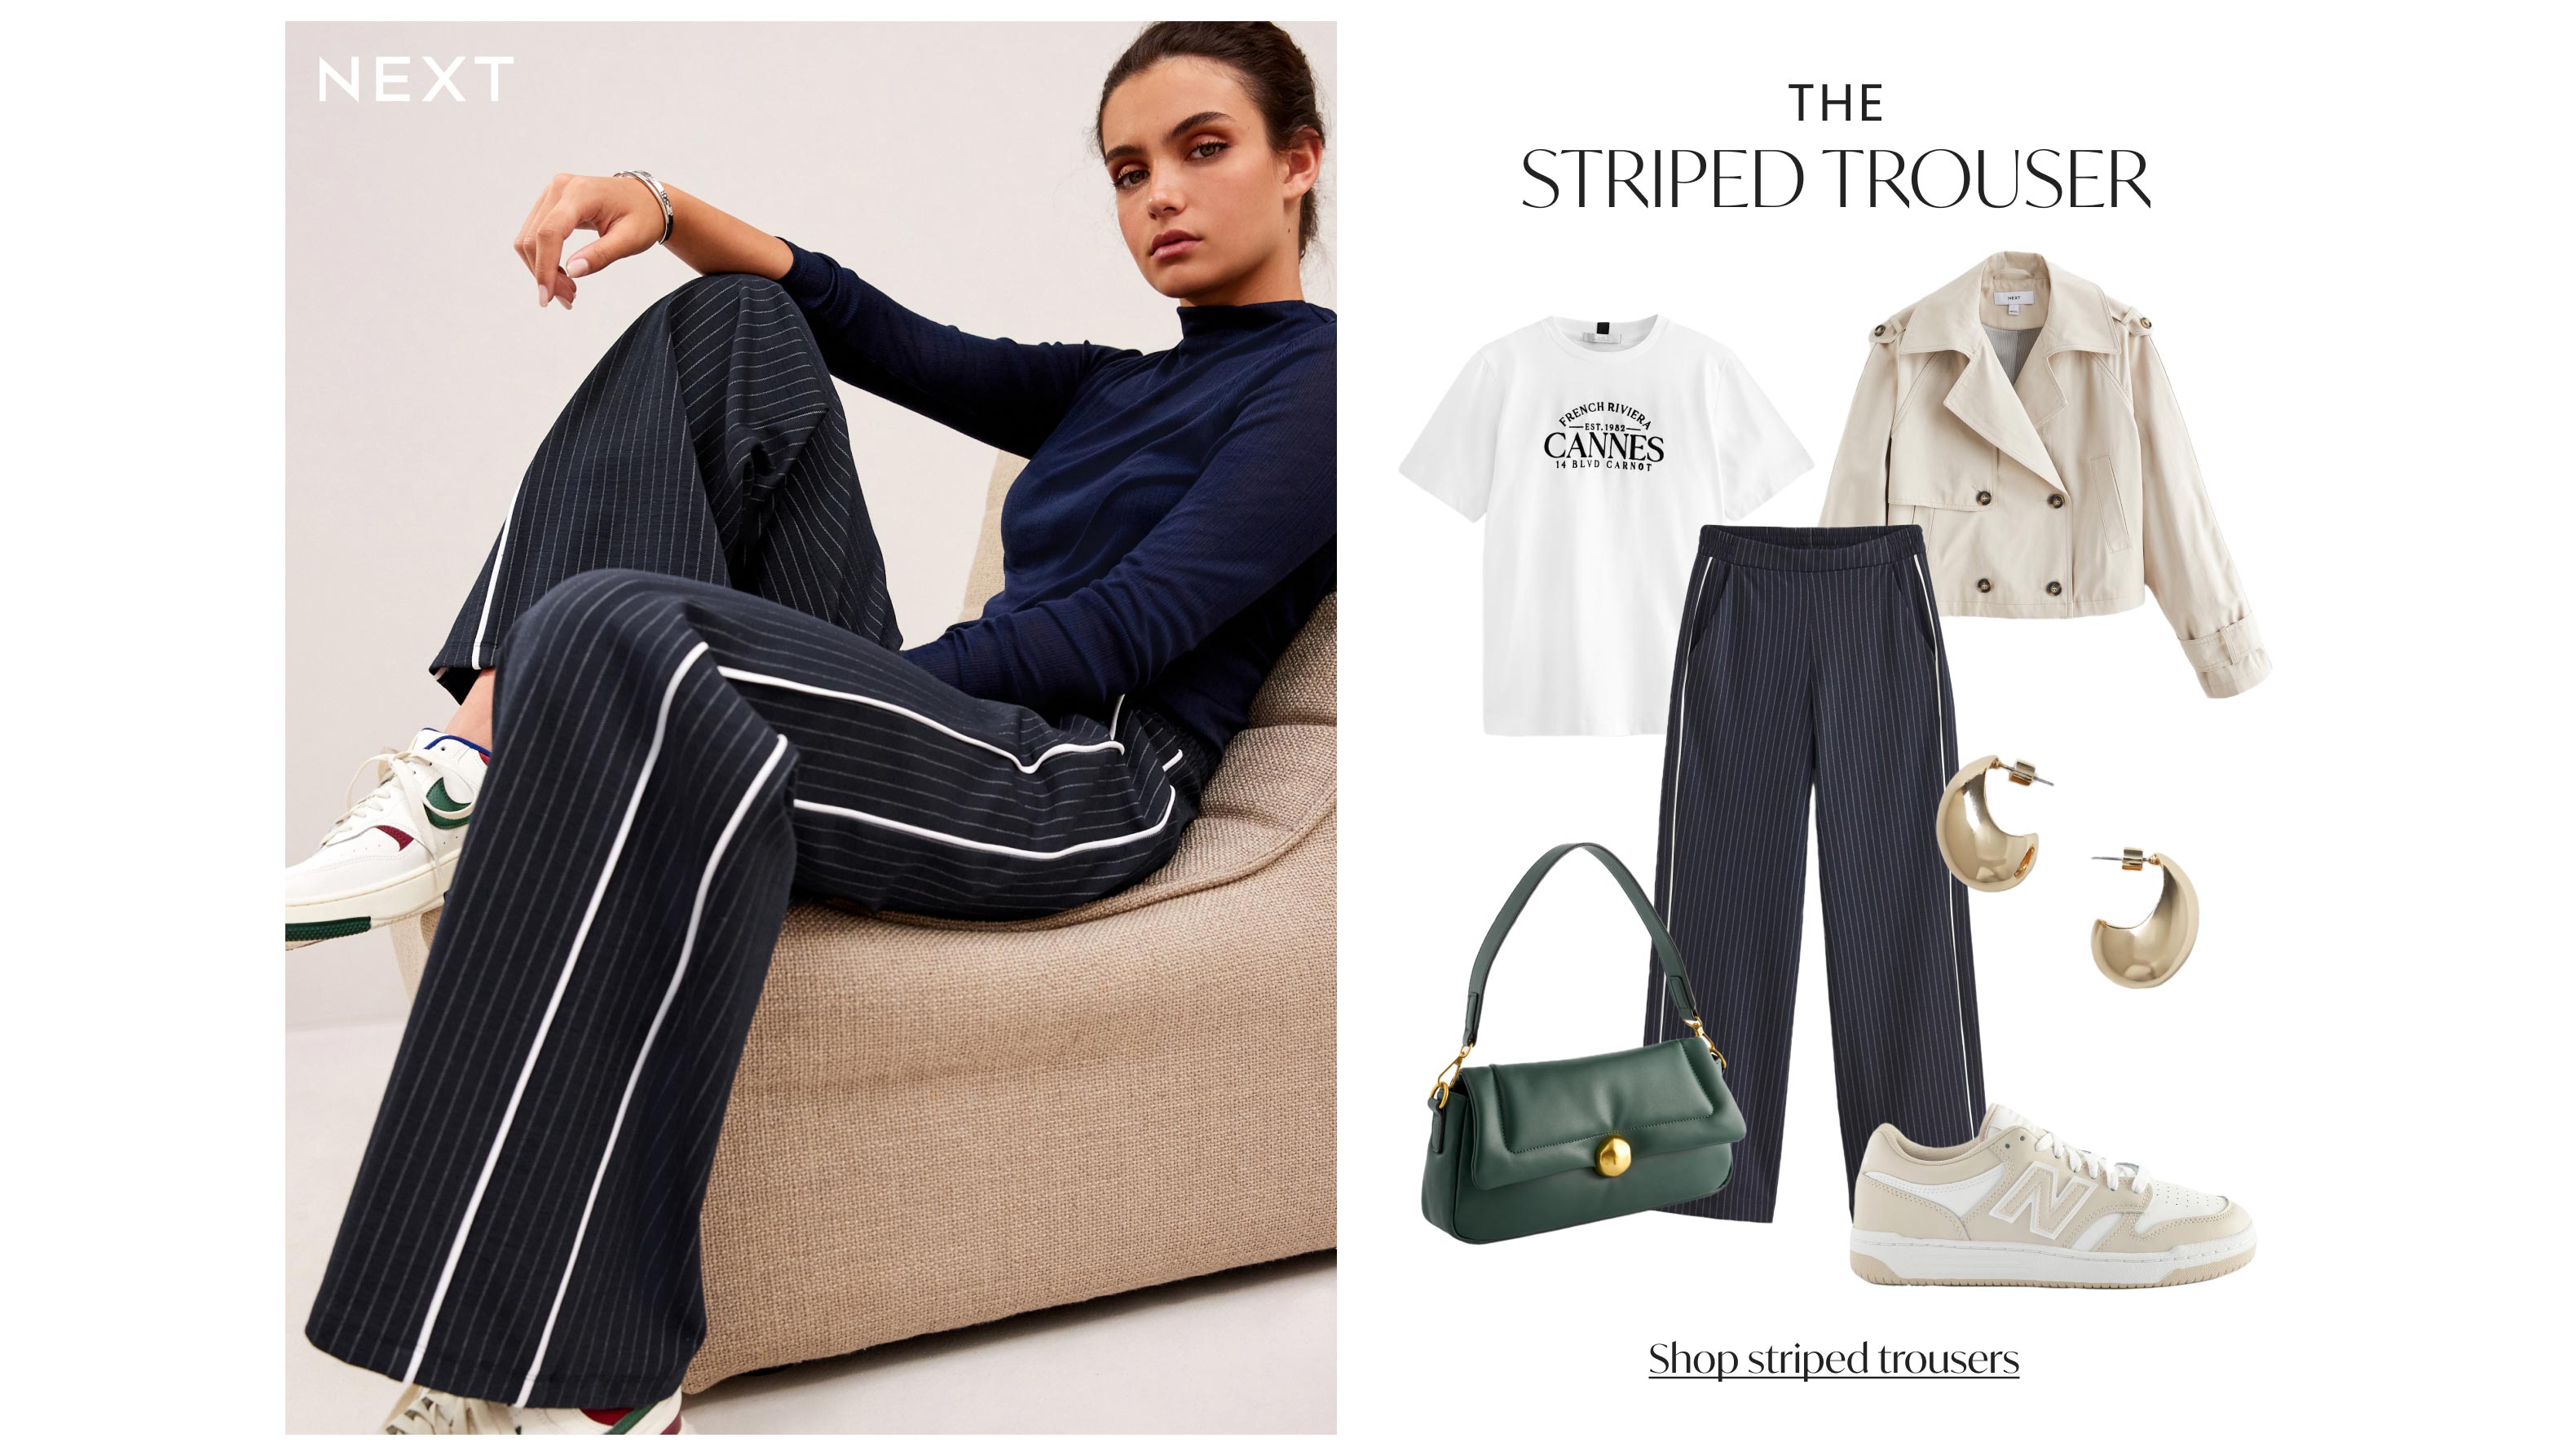 Shop striped trousers